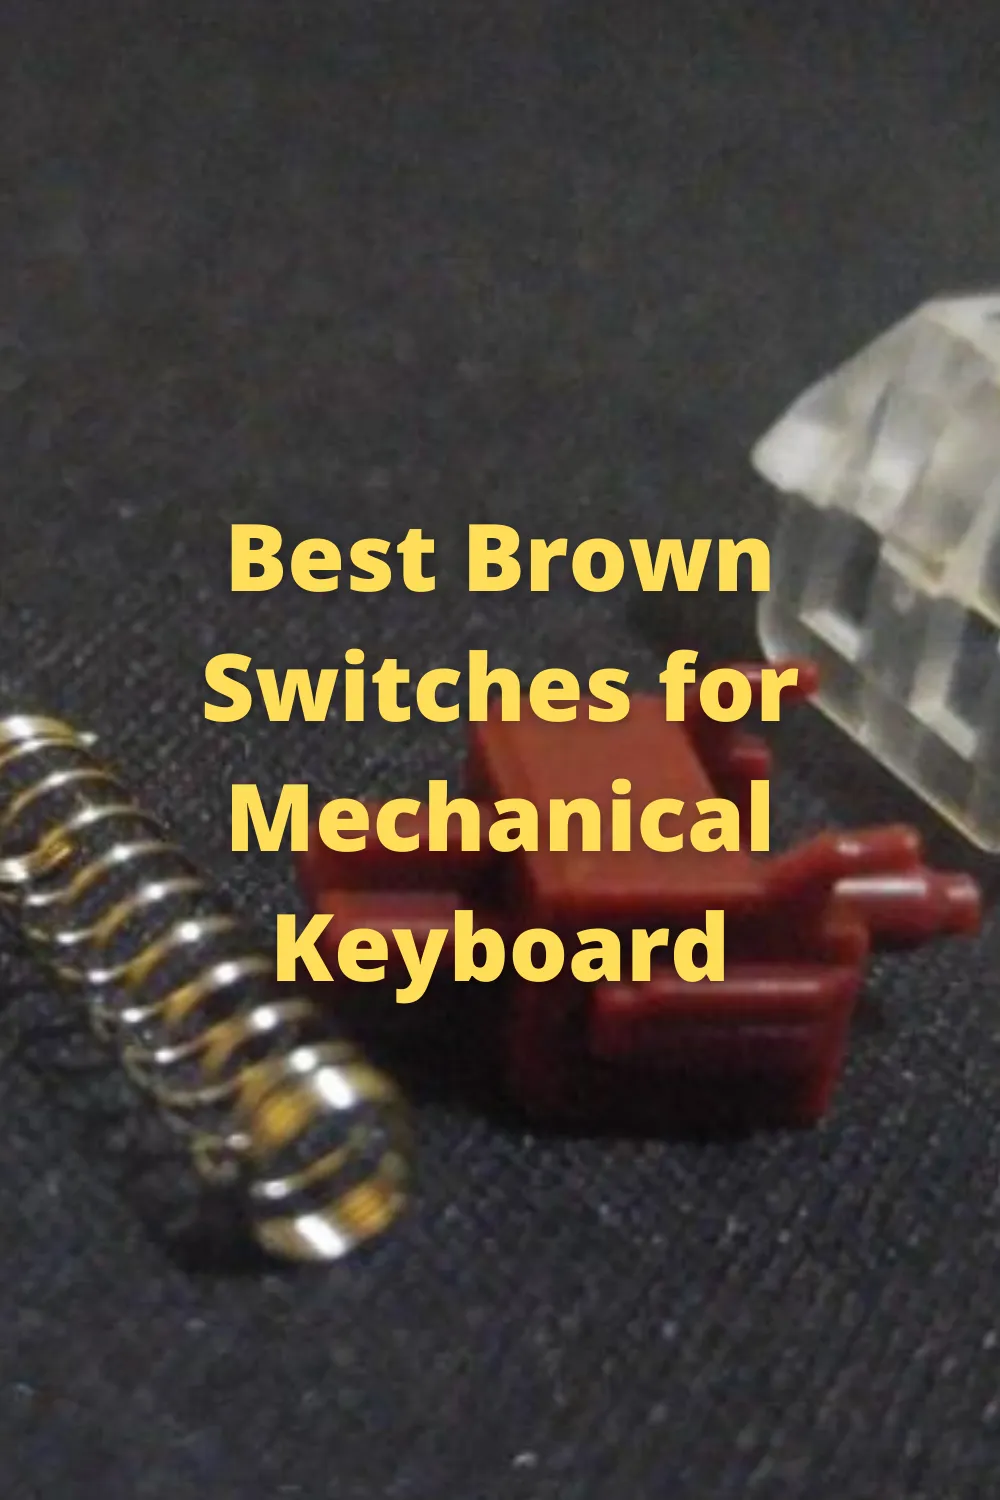 Best Brown Switches for Mechanical Keyboard